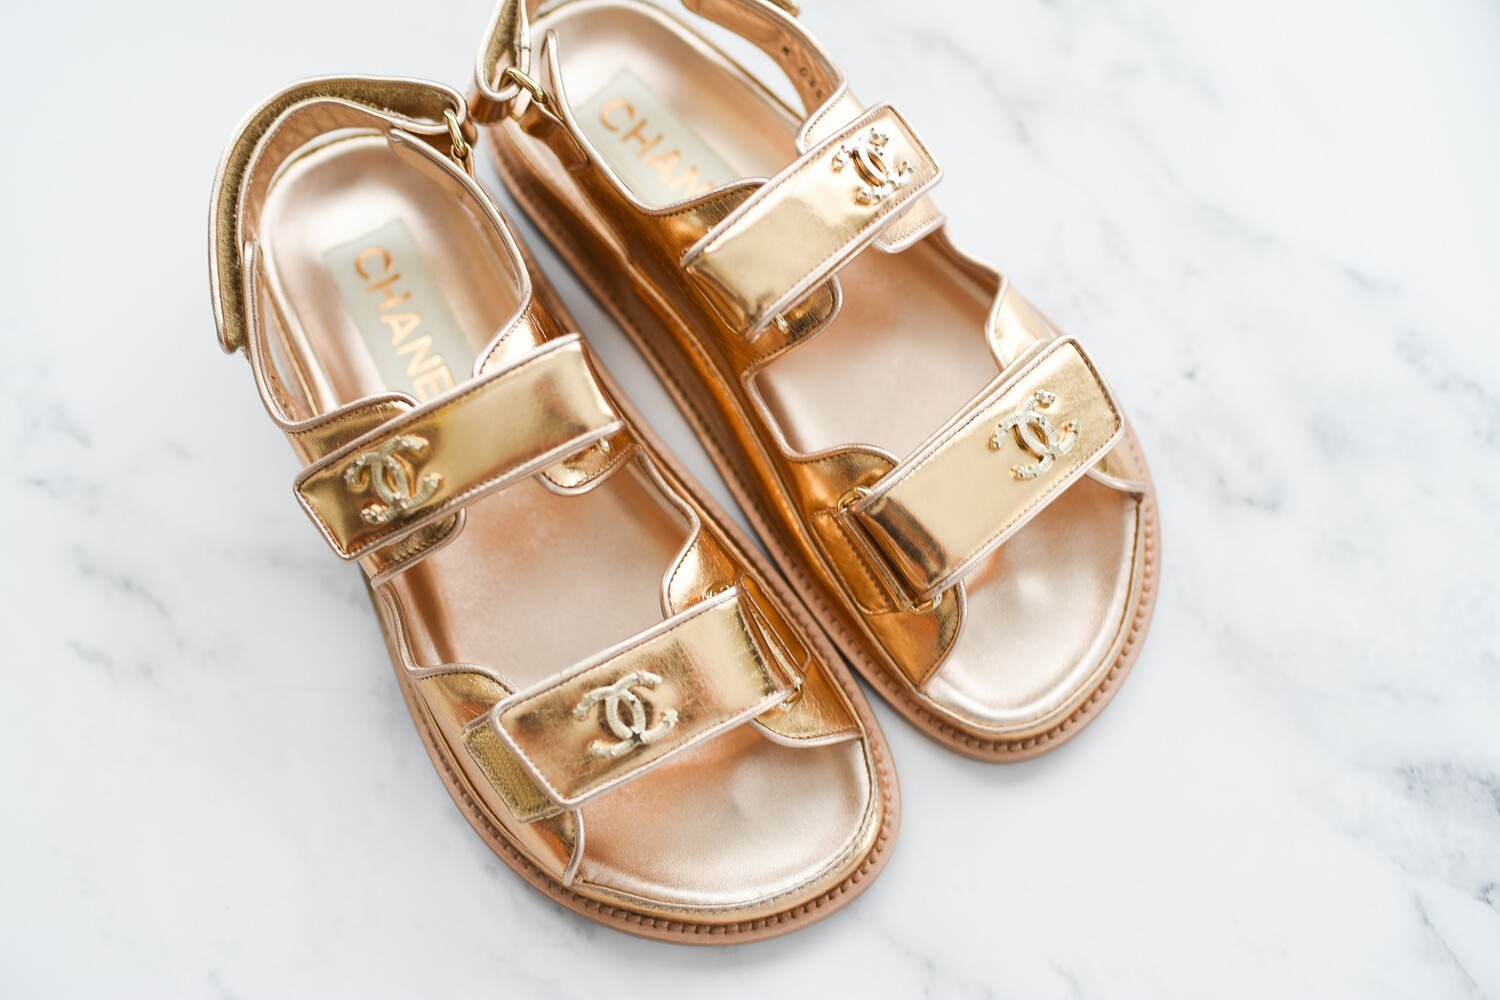 Chanel Shoes Dad Sandals Golden, Size 37, New in Box GA003